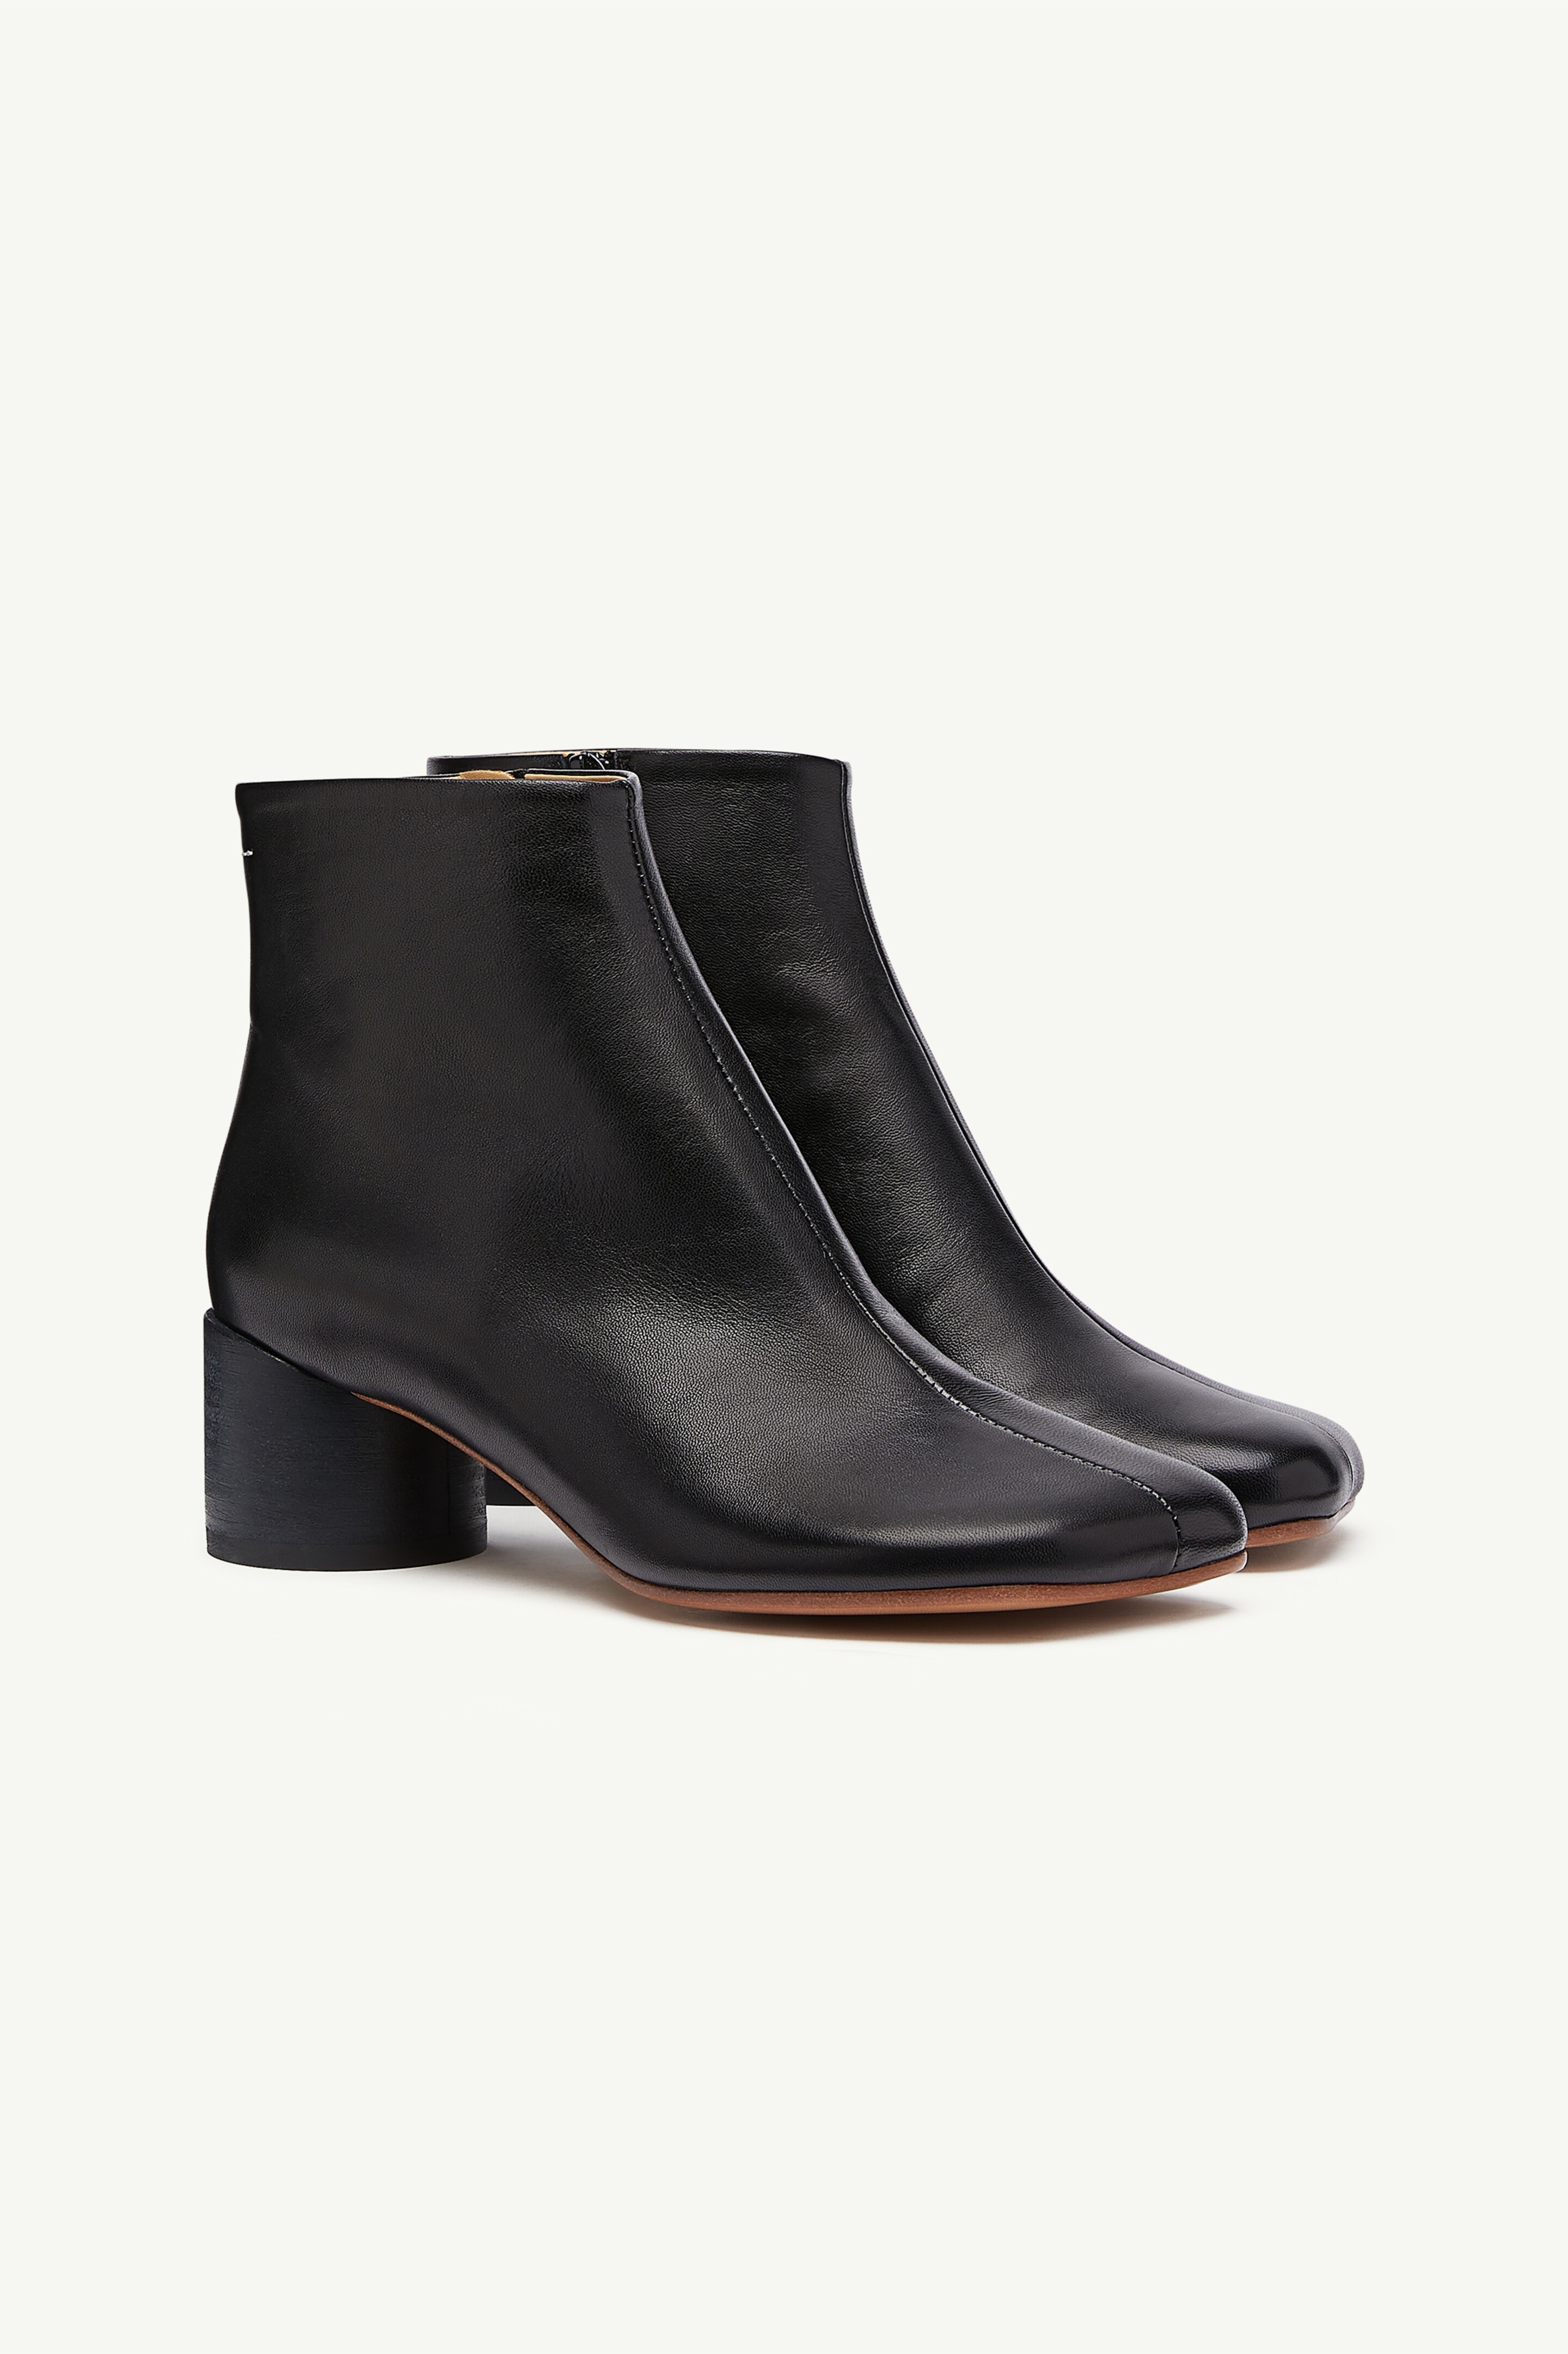 Anatomic classic ankle boots - 2